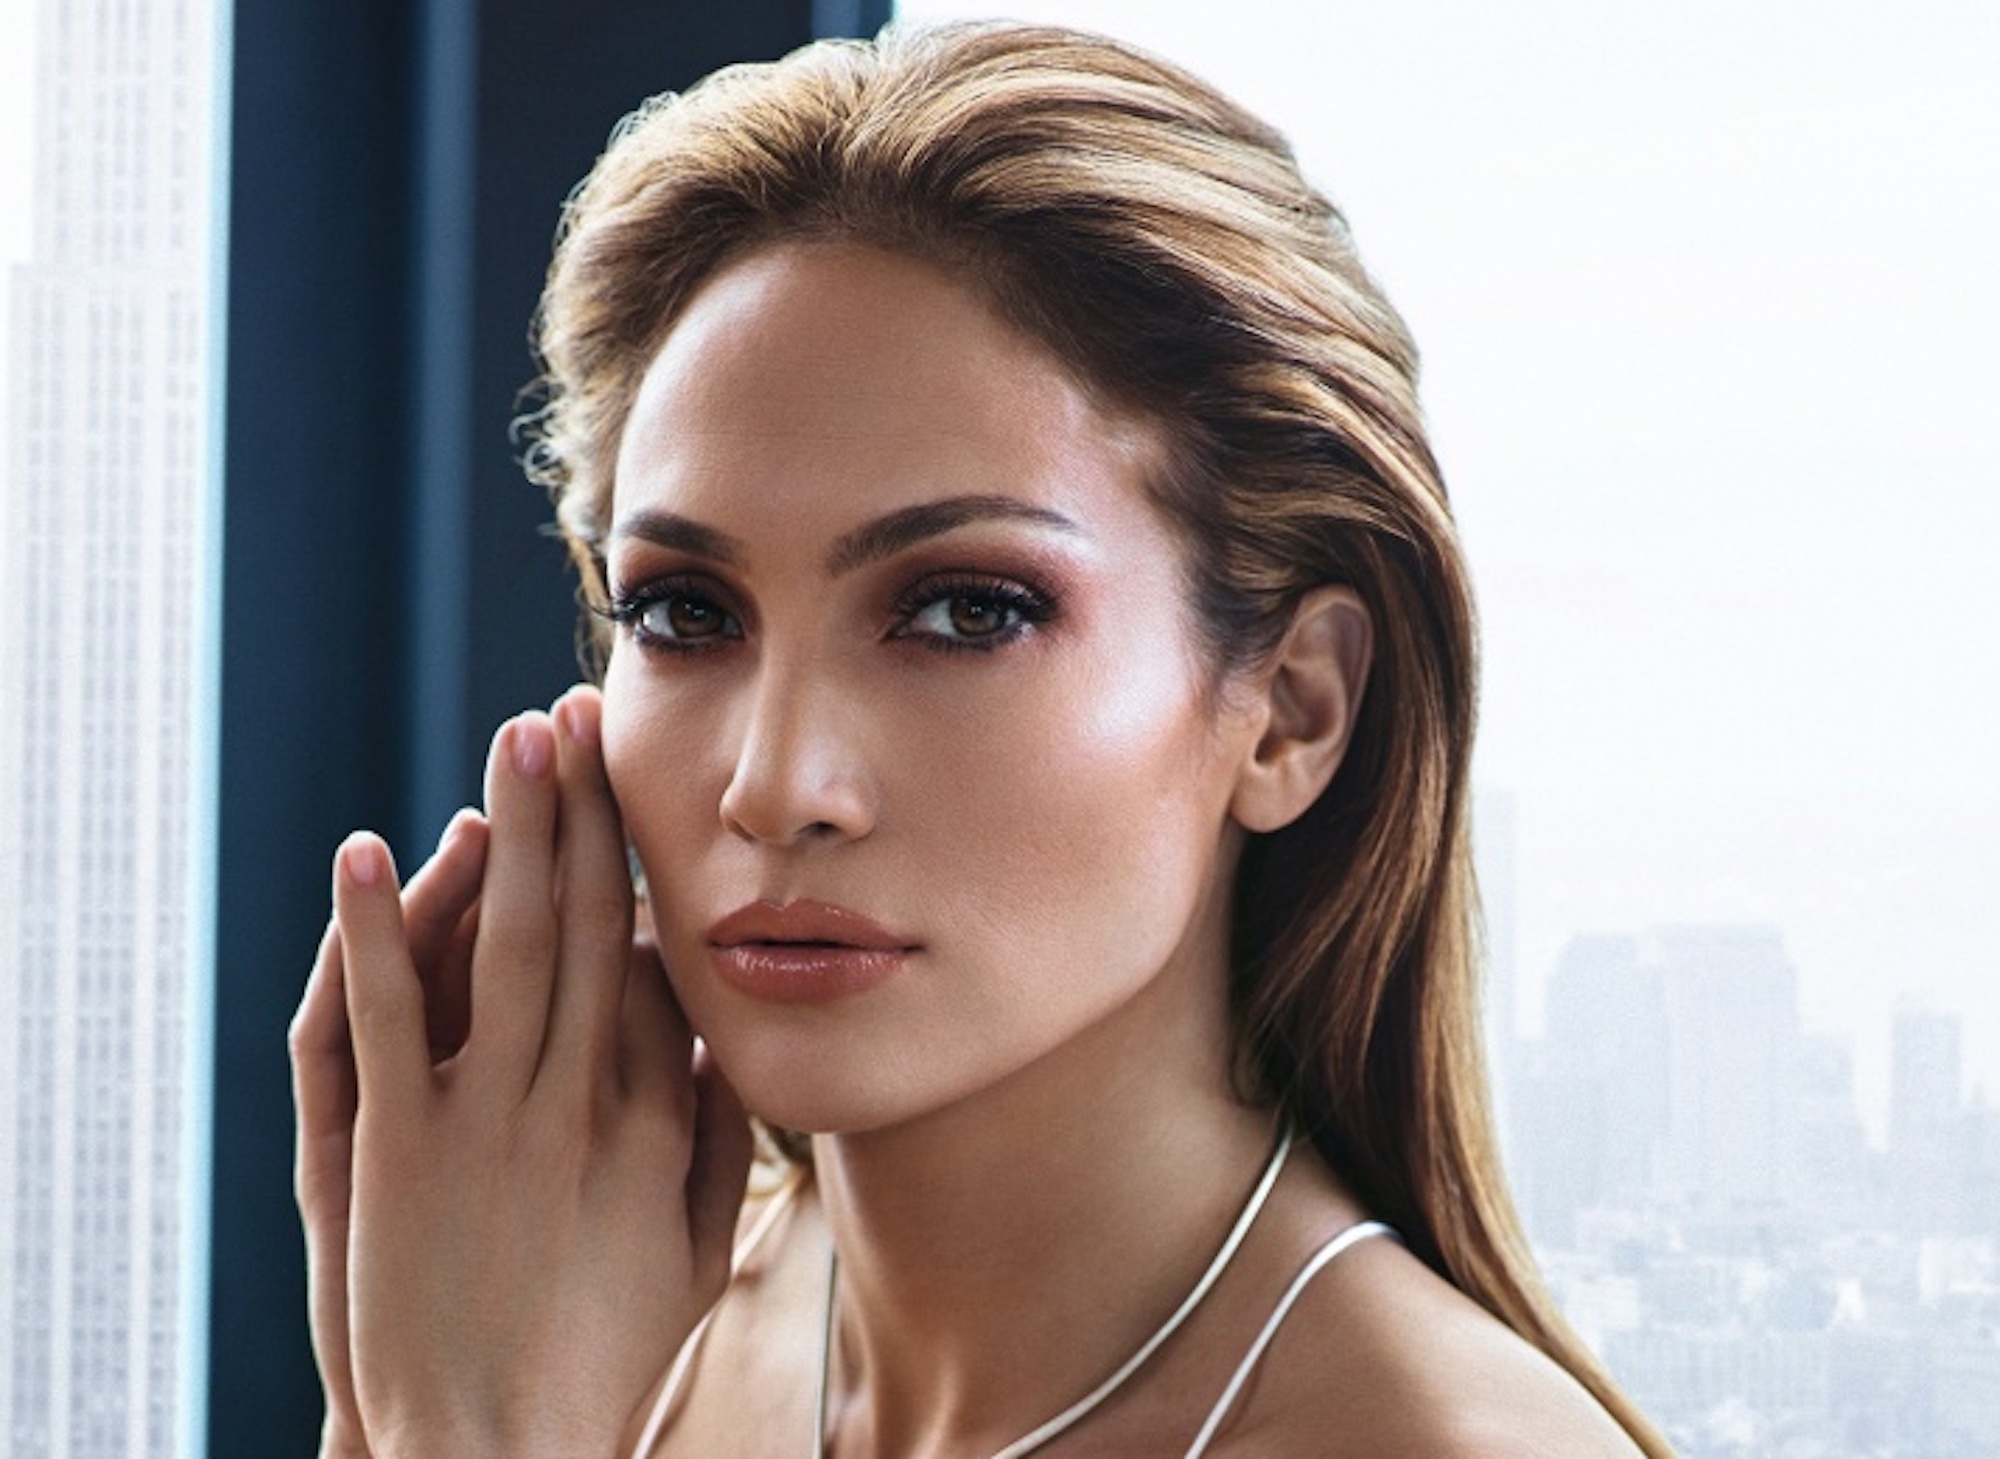 Jennifer Lopez is Living Her Best Life with “Cambia El Paso”